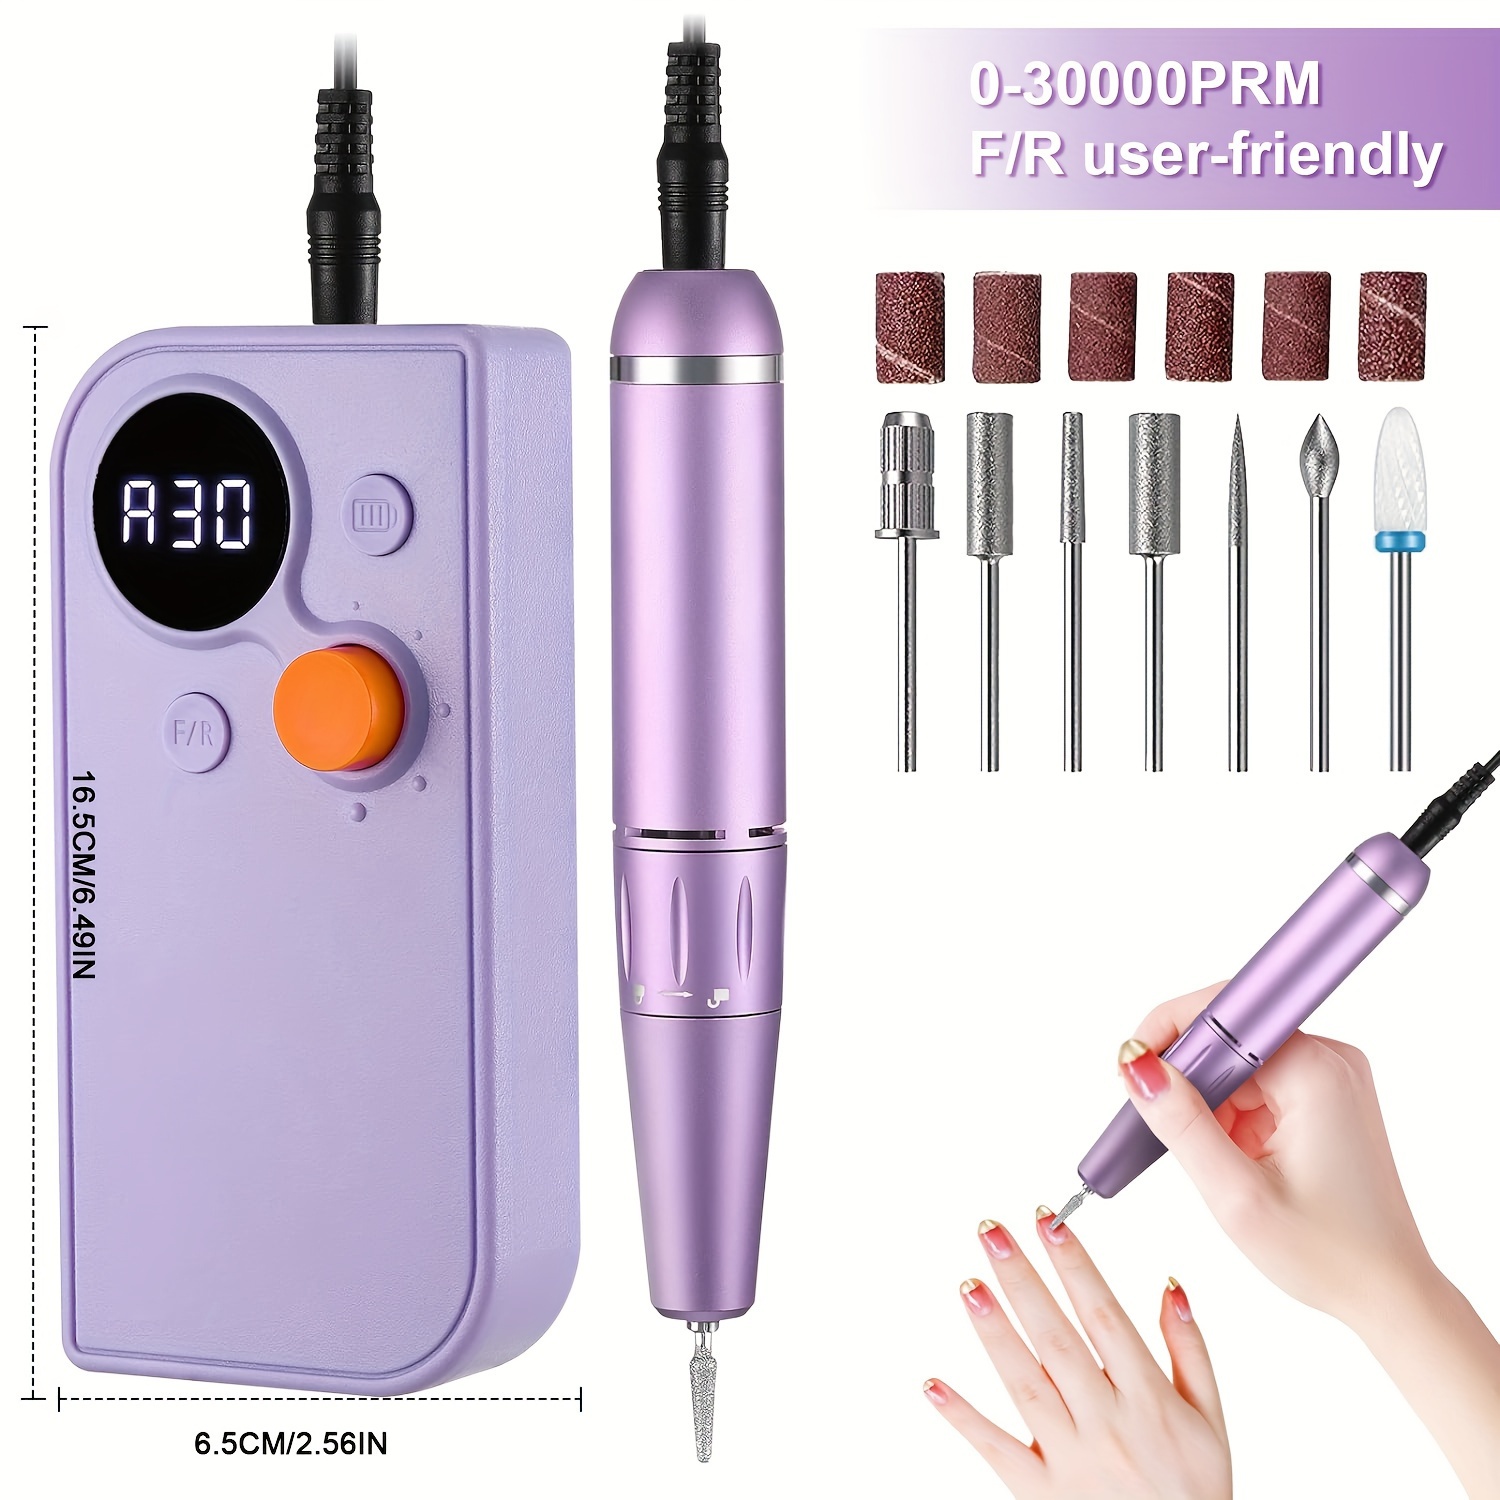 

Rechargeable 30000 Rpm Professional Electric File With Power Bank Function, Portable Nail Drill For Home And Salon, Nail File Drill Machine, Manicure Pedicure Kit